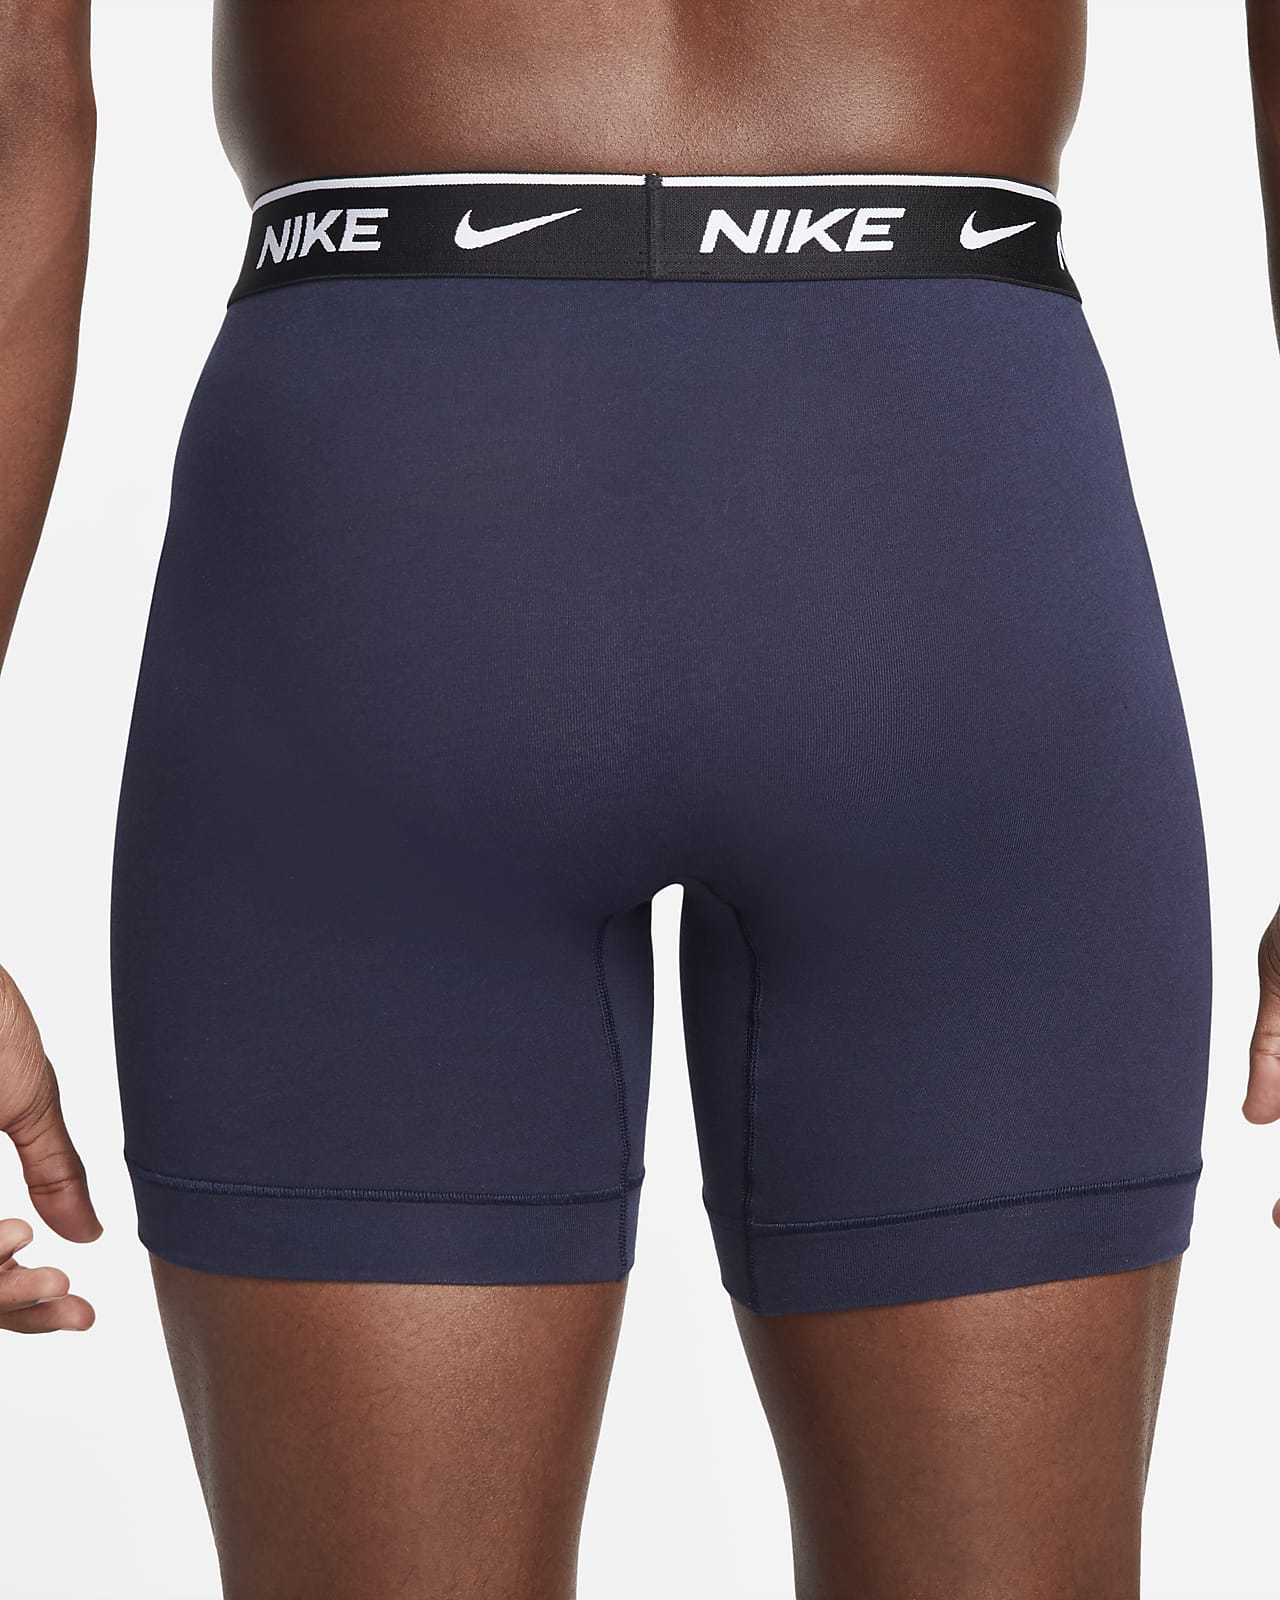 Nike Essential Cotton Stretch Boxer Brief 3pk, Transparency Swoosh Print, S  at  Men's Clothing store